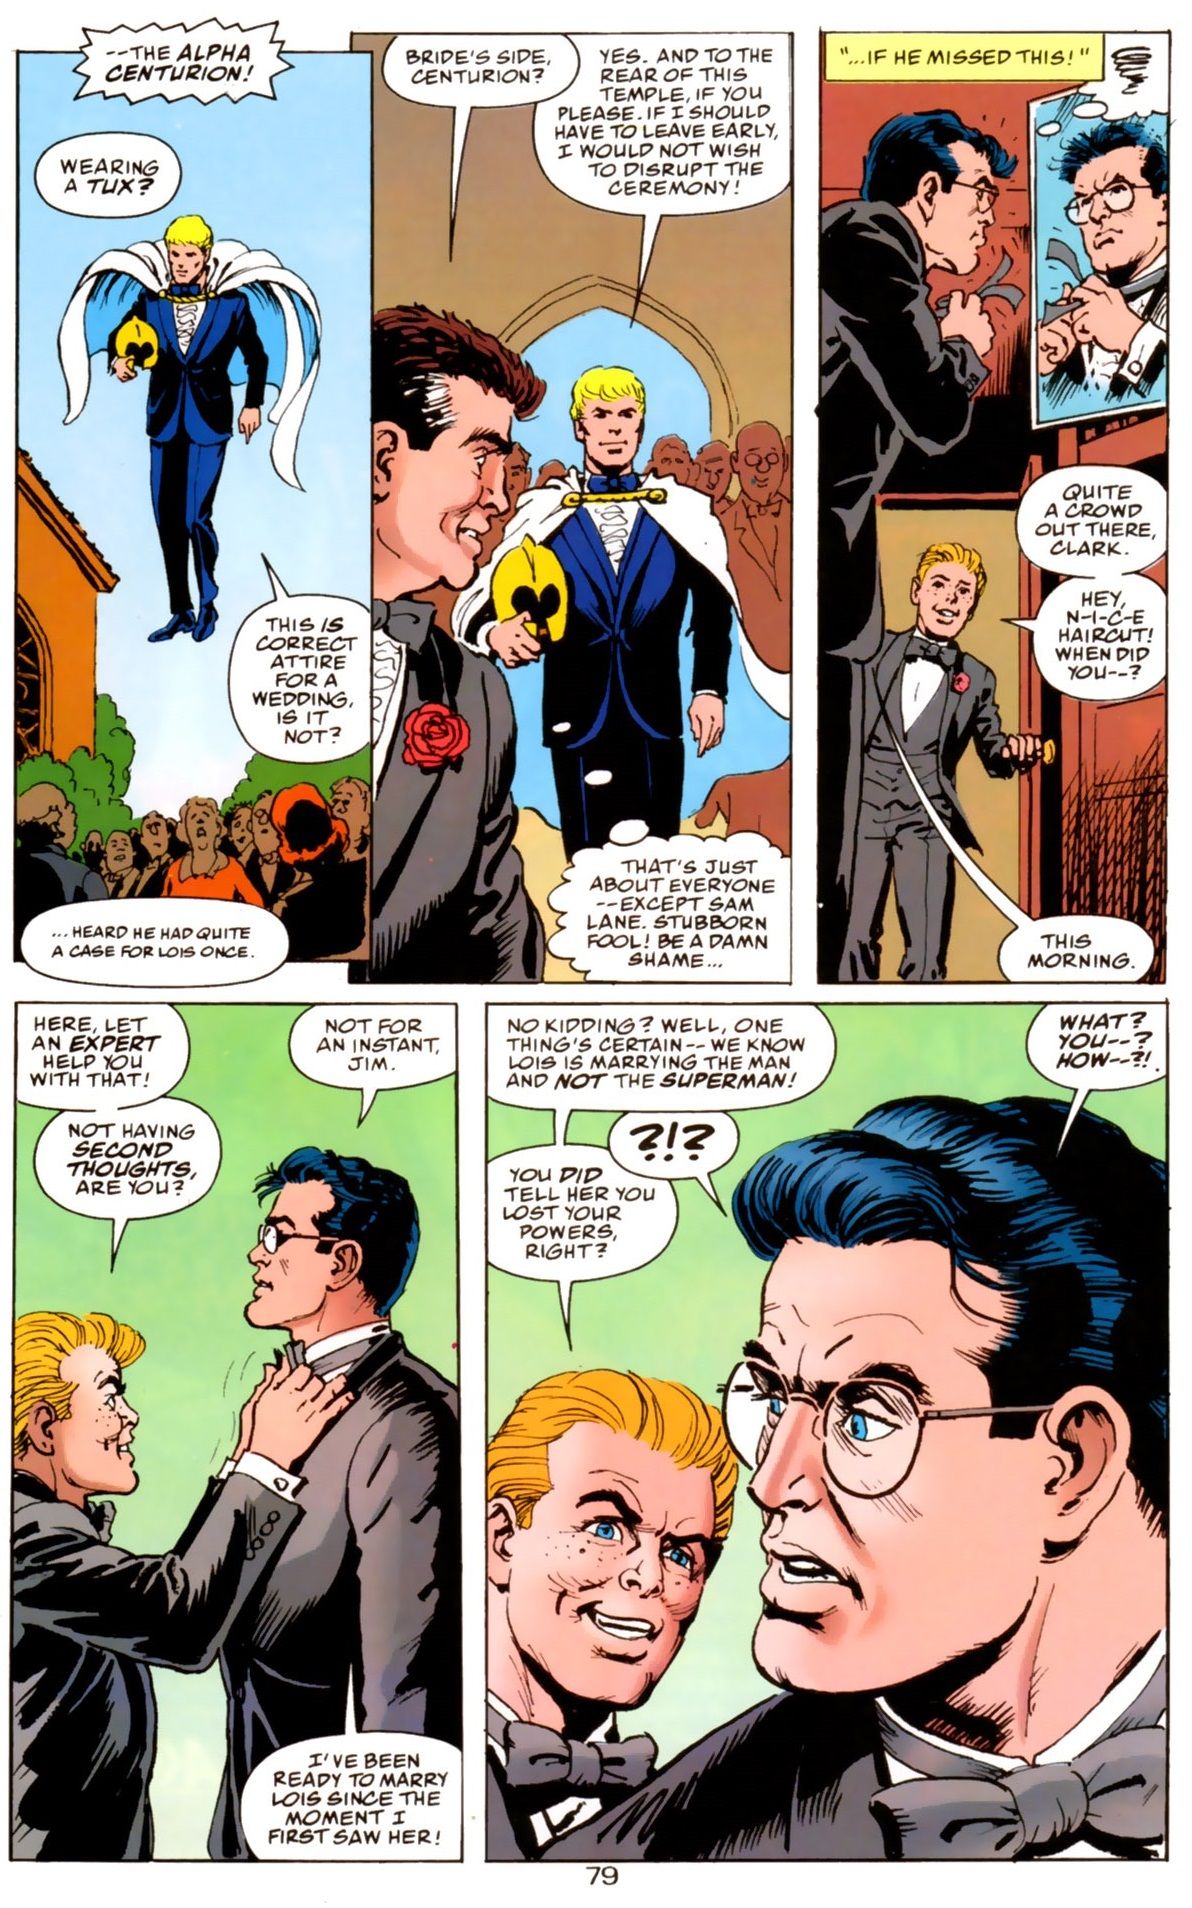 Superman gets a haircut for his wedding